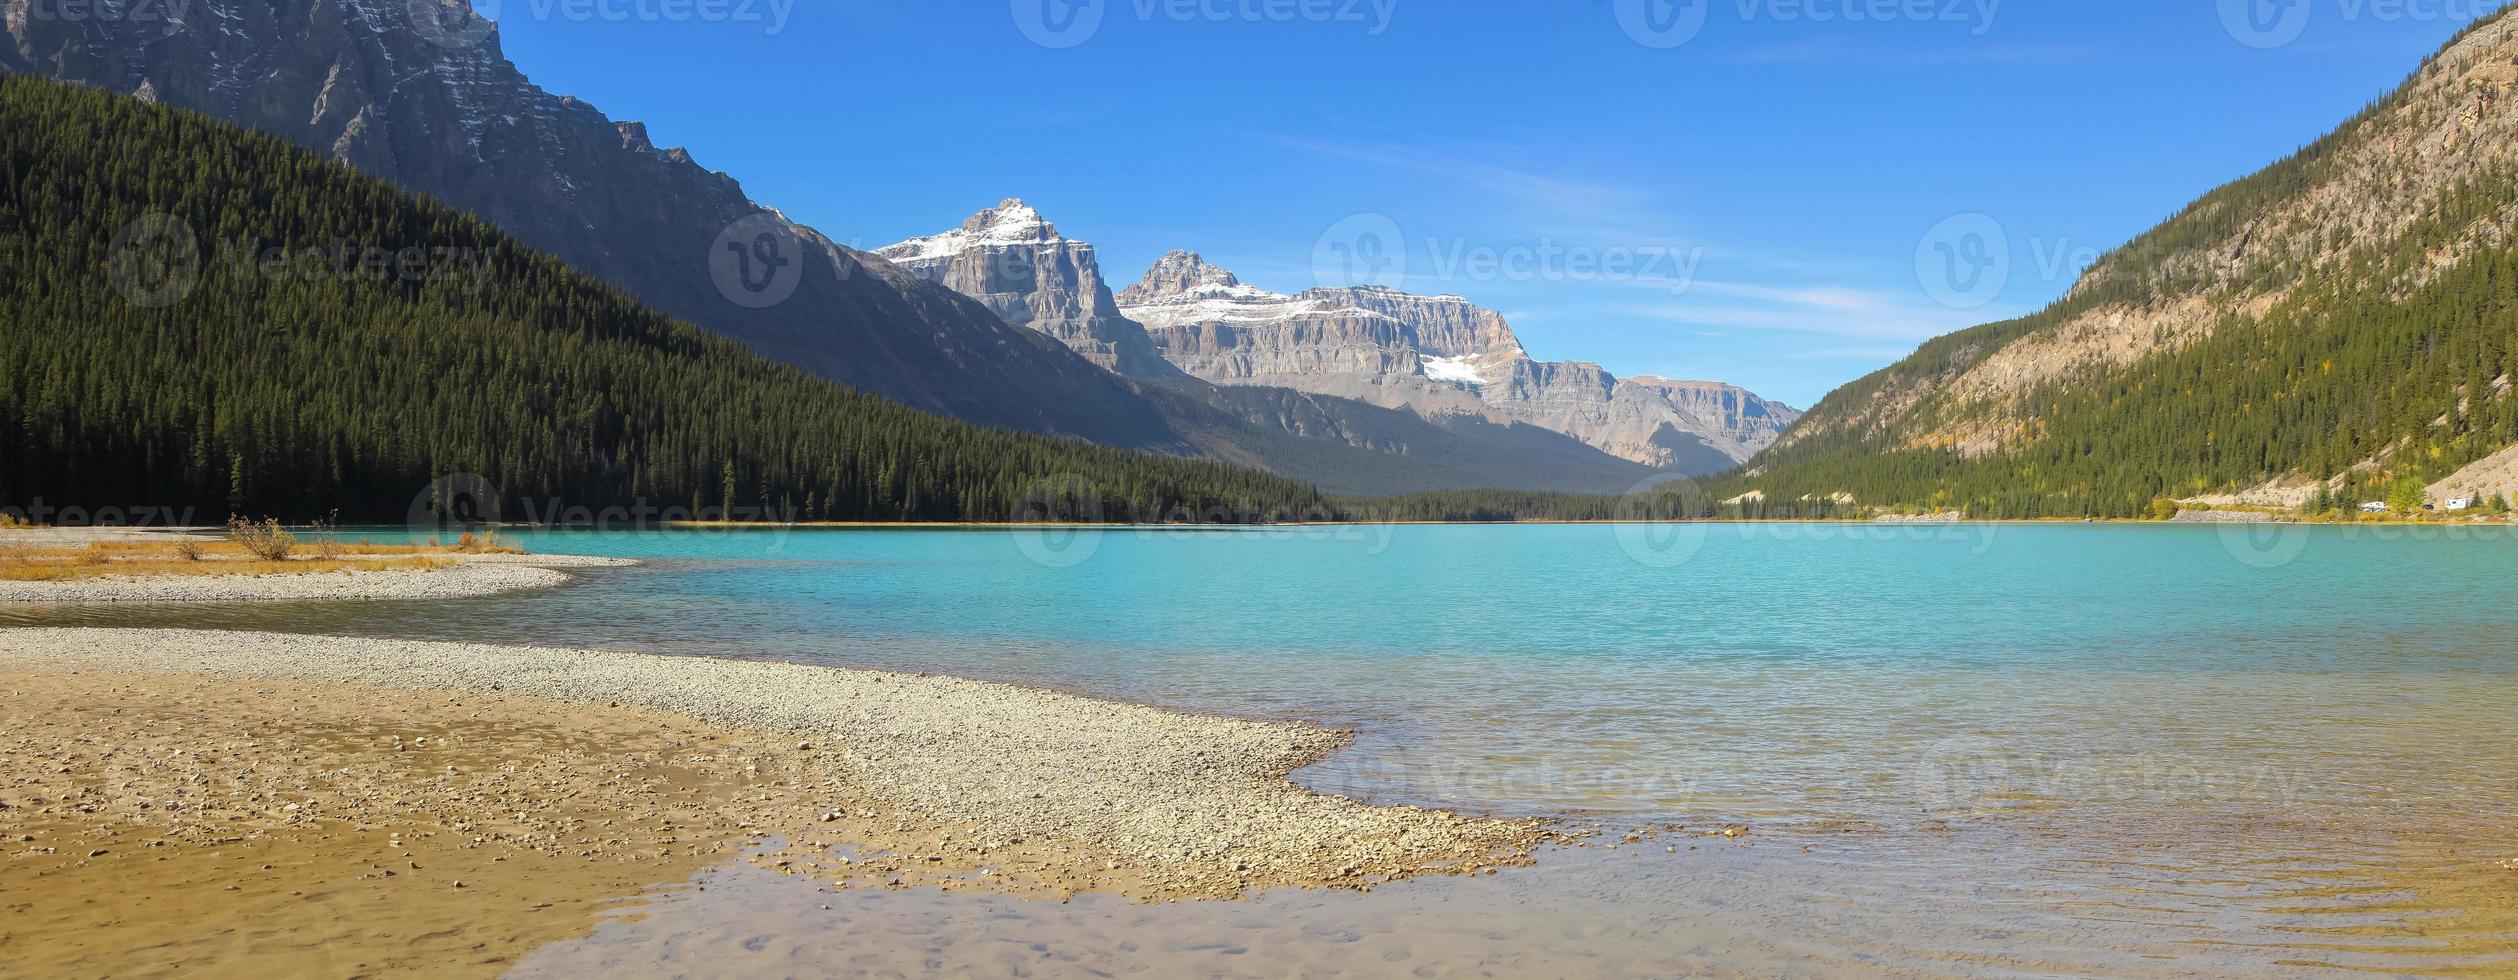 Panoramic view of Canadian rocky mountains , around scenic Bow lake in Banff national park. photo